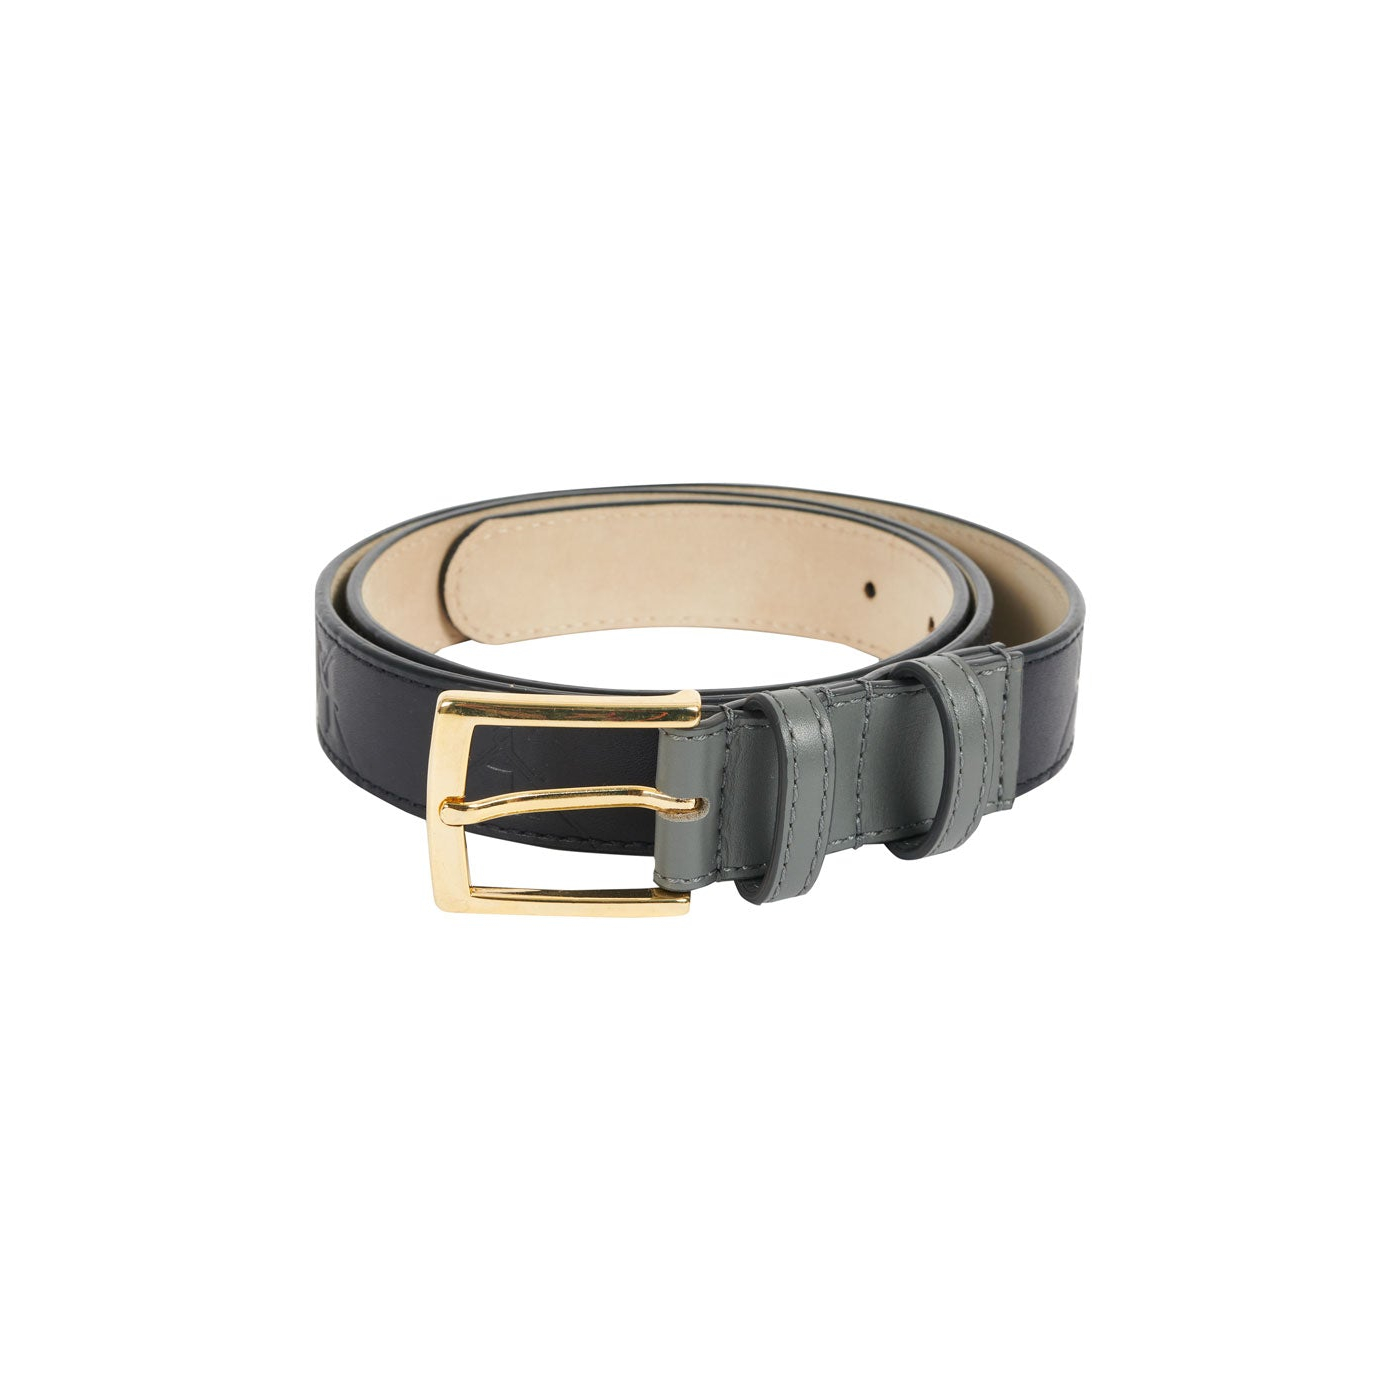 Thumbnail PAL-M-GRAM LEATHER BELT MIDNIGHT BLUE one color